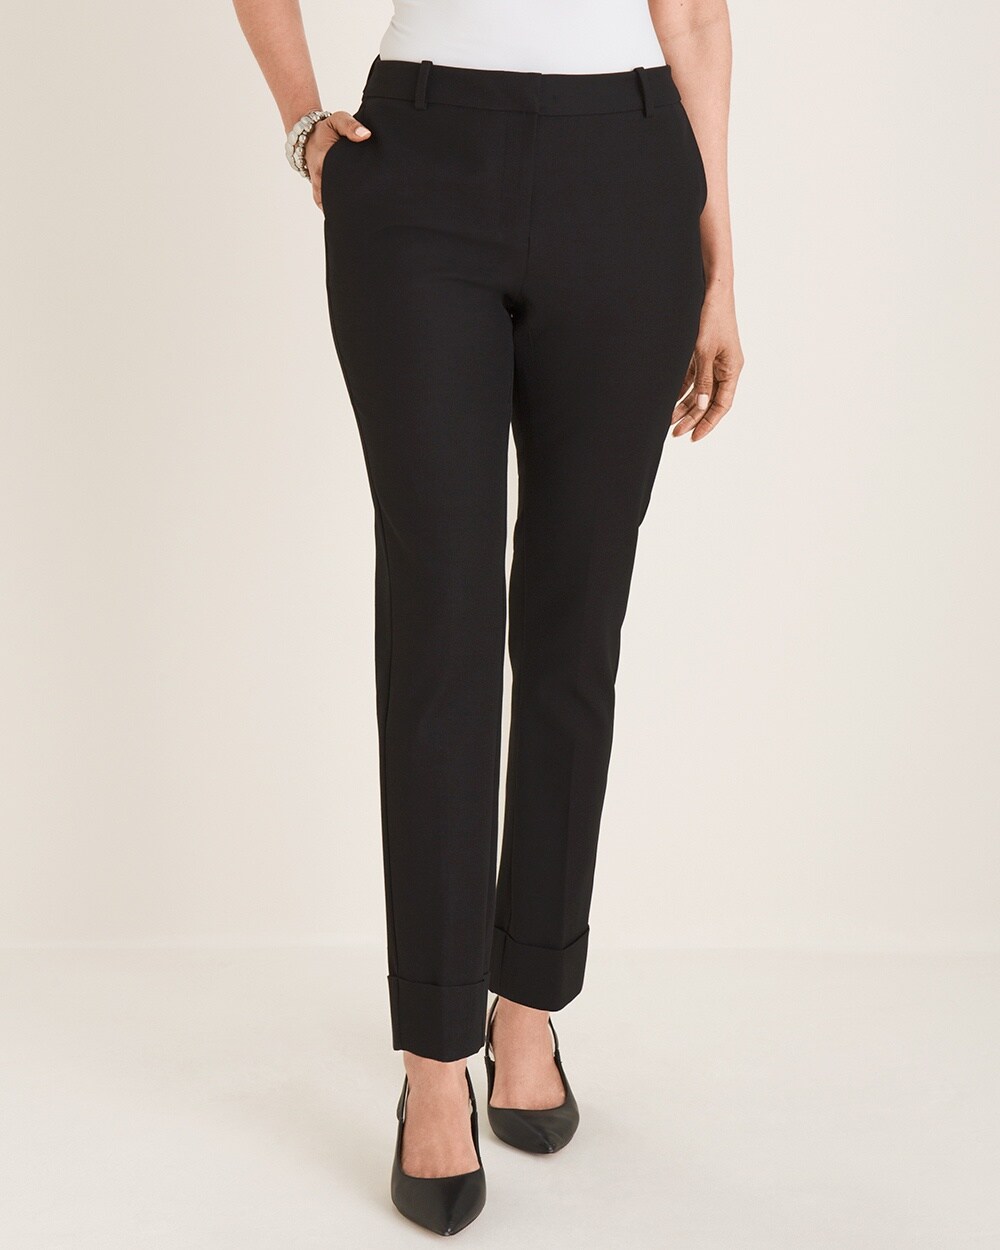 Fly-Front Ankle Pants